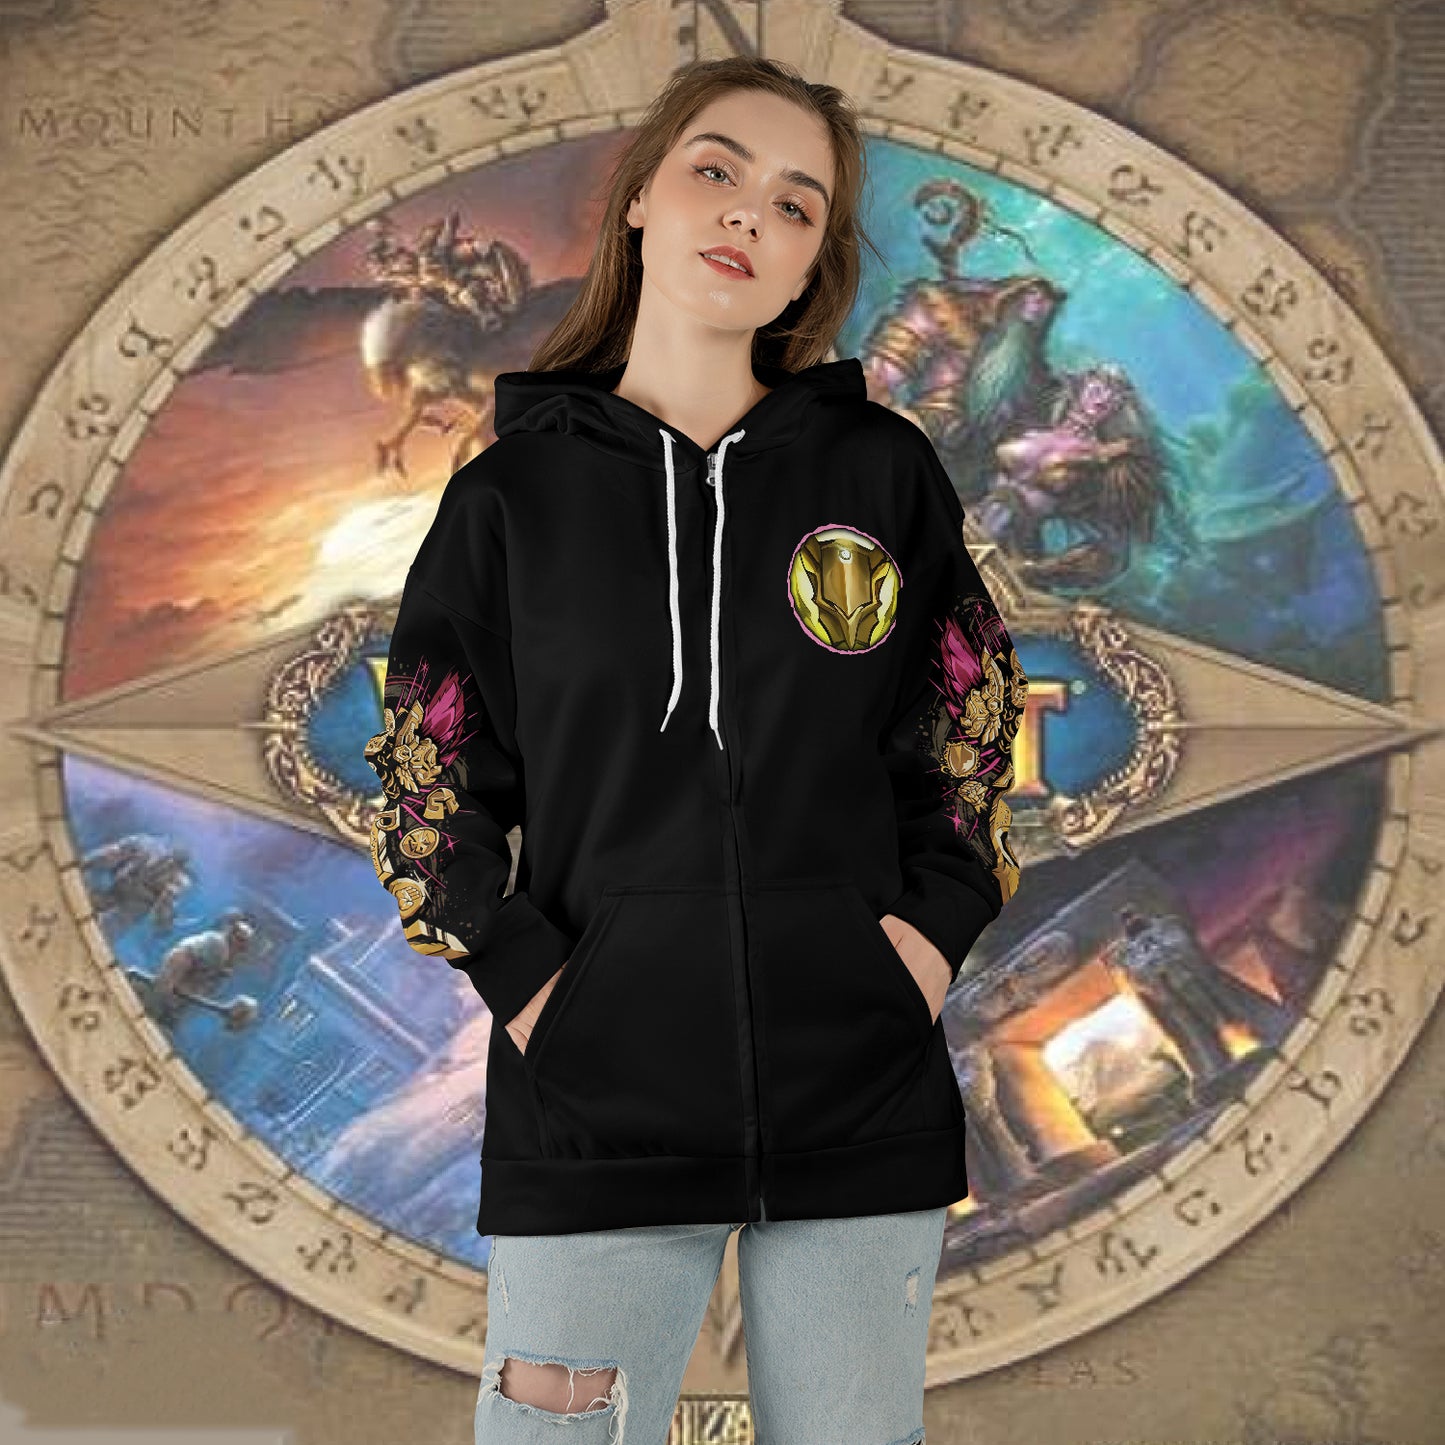 WoW Class Protection Paladin Guide V1 All-over Print Zip Hoodie